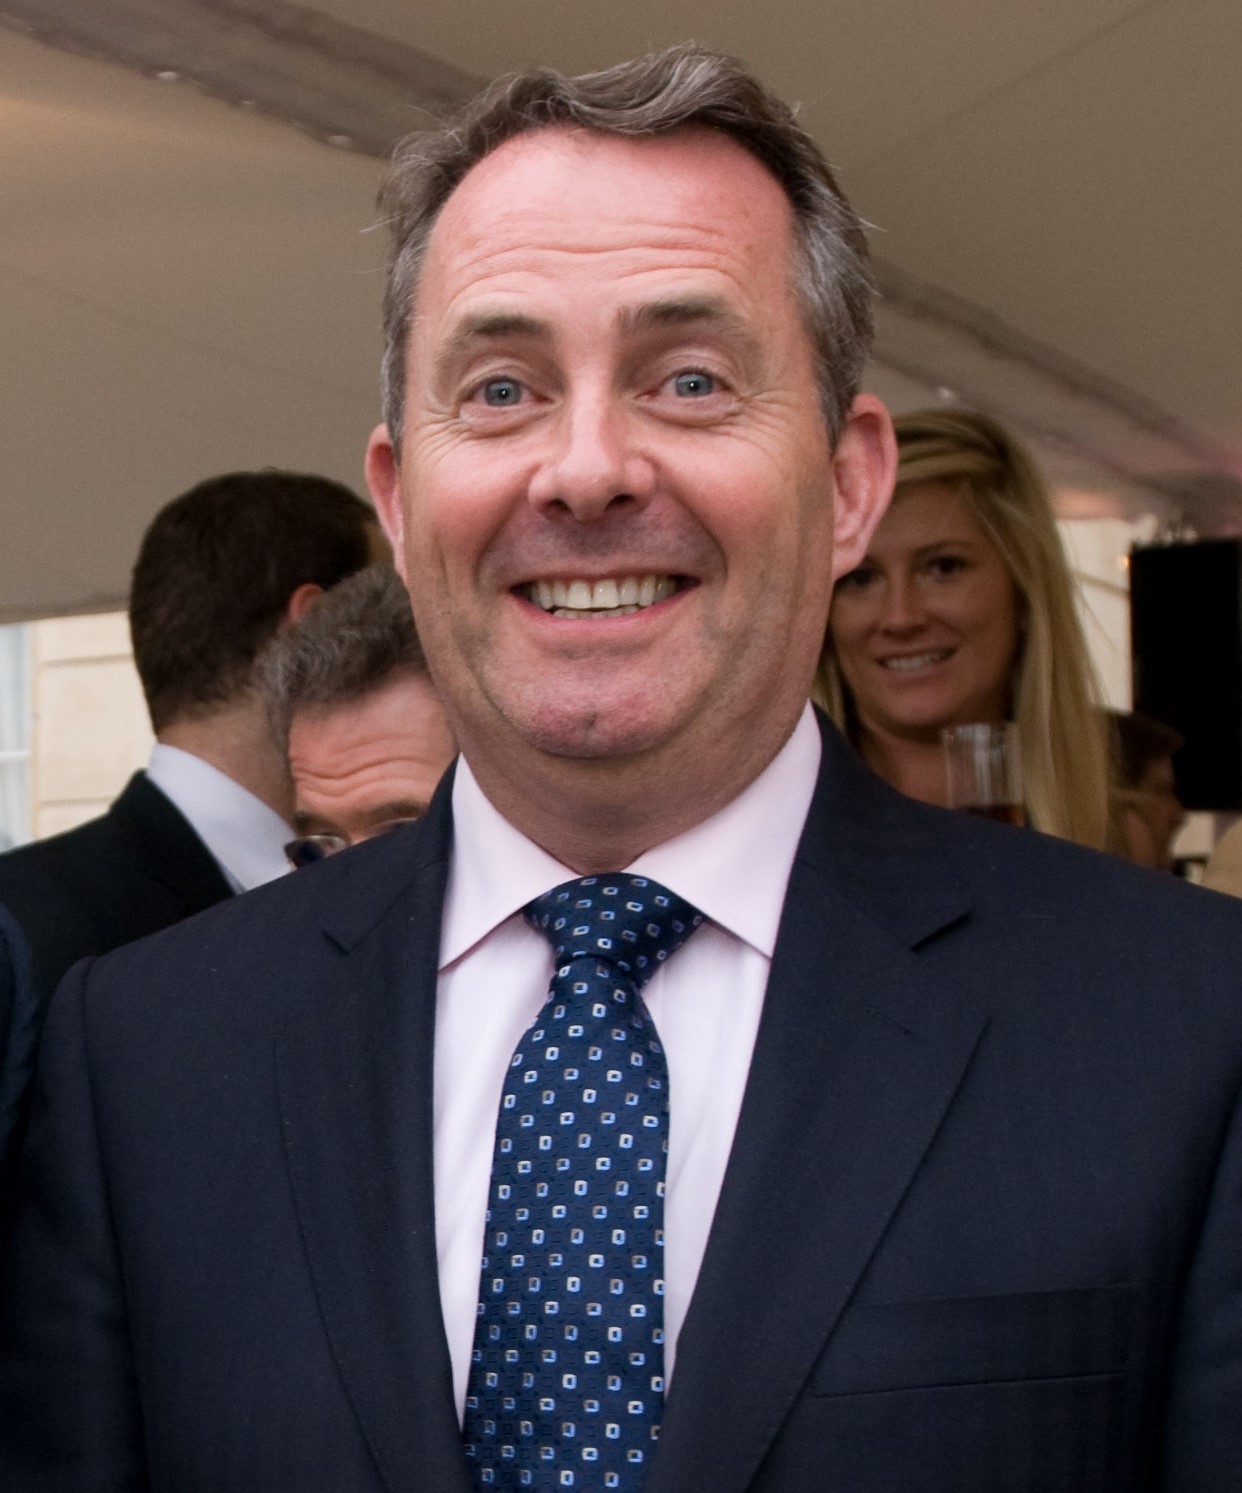 Liam Fox says Japan wants trade deal with Britain 'quite quickly'